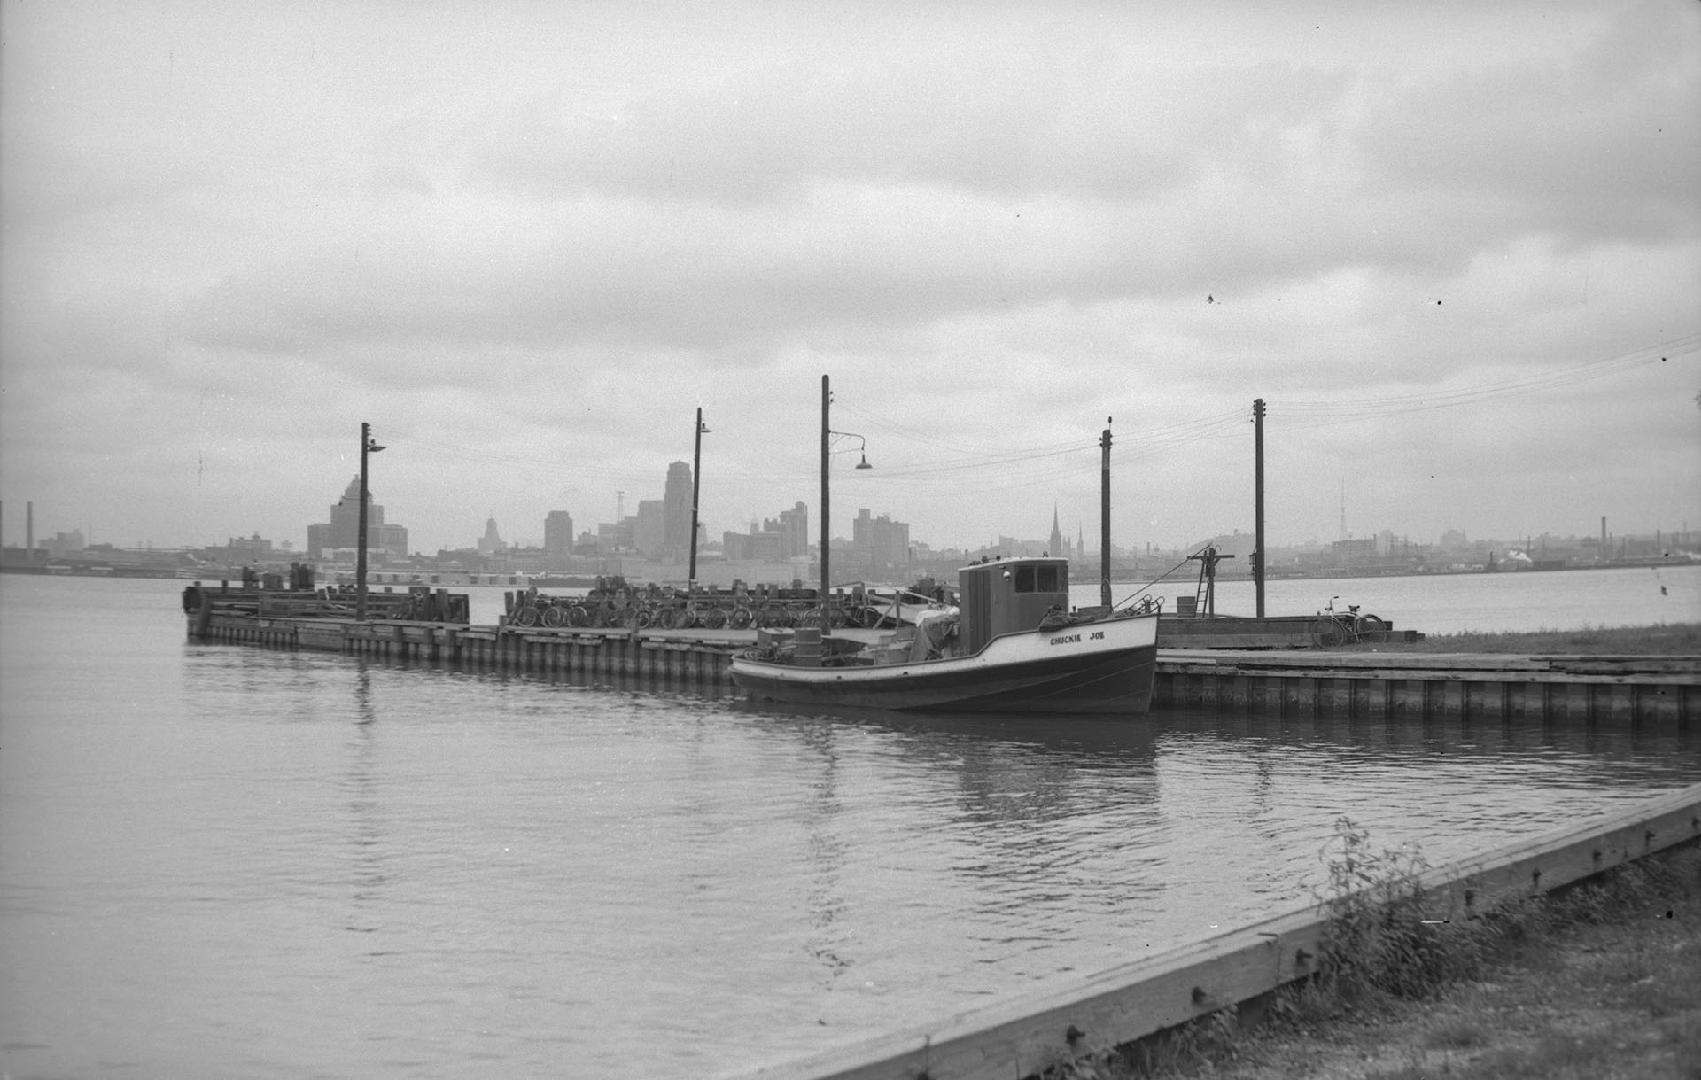 Image shows a tugboat docked at the island with the Toronto Harbour in the background.